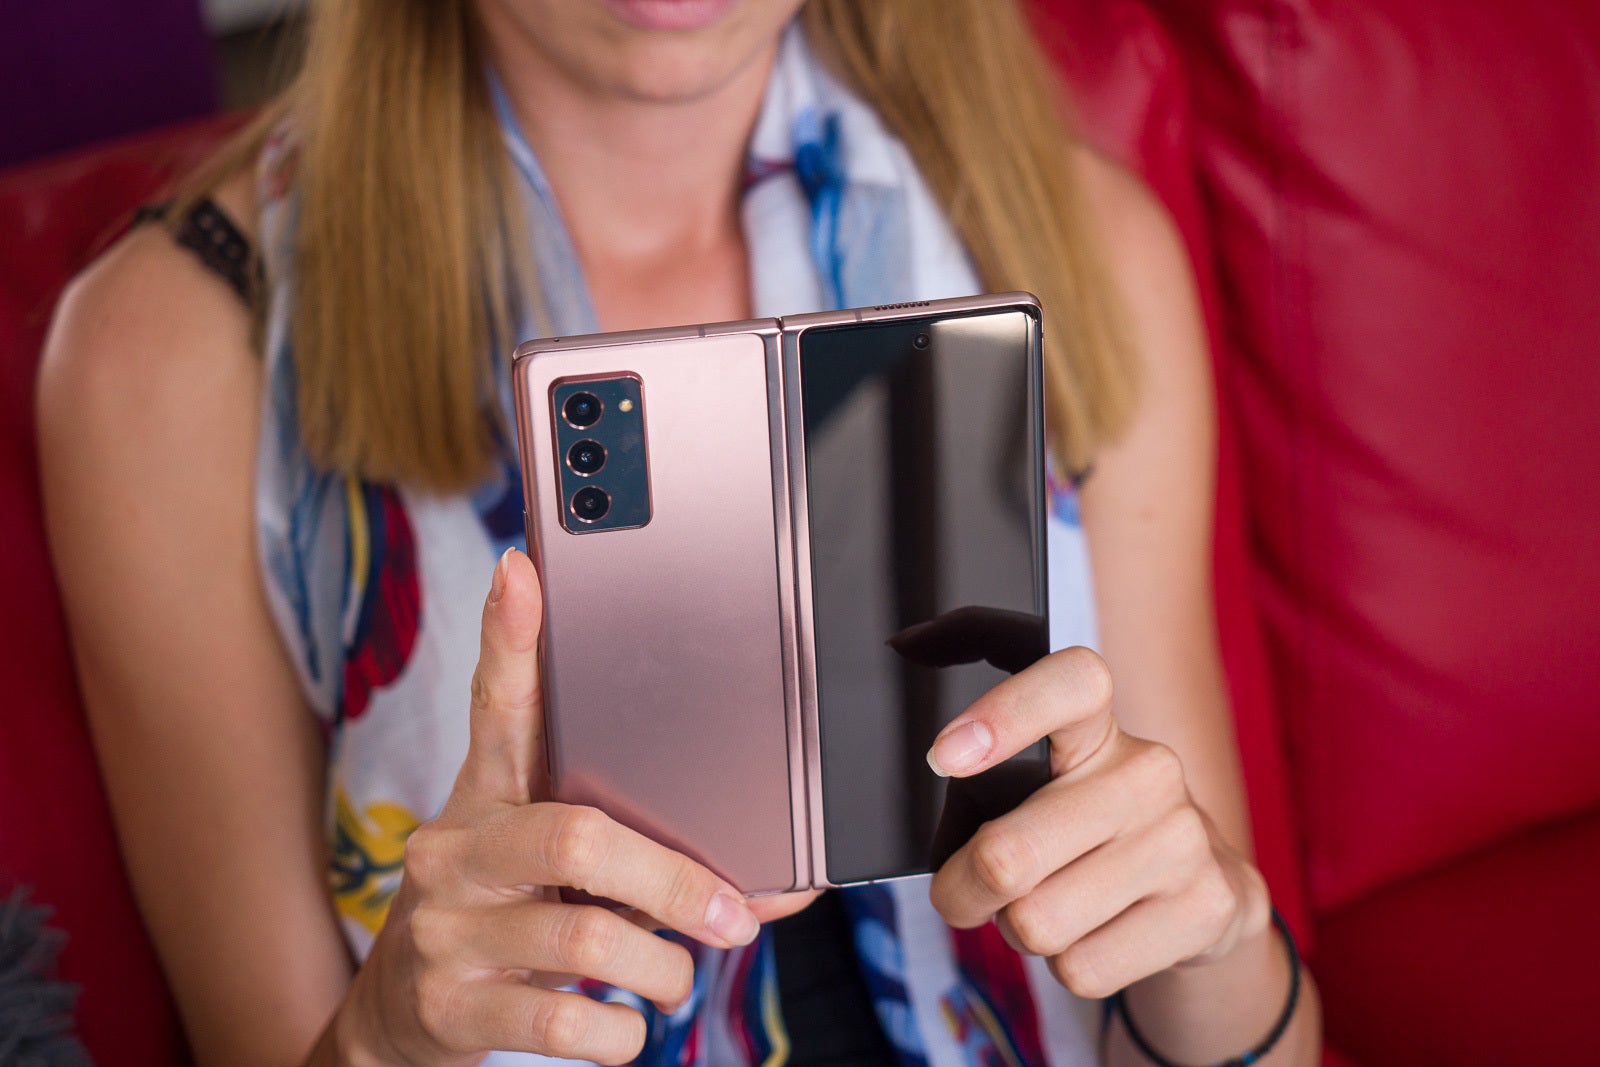 The Z Fold 2 mostly addressed the issues found on the OG Galaxy Fold, while the Z Fold 3 is expected to bring many new features - Galaxy Z Fold 3 to support S-Pen and UWB